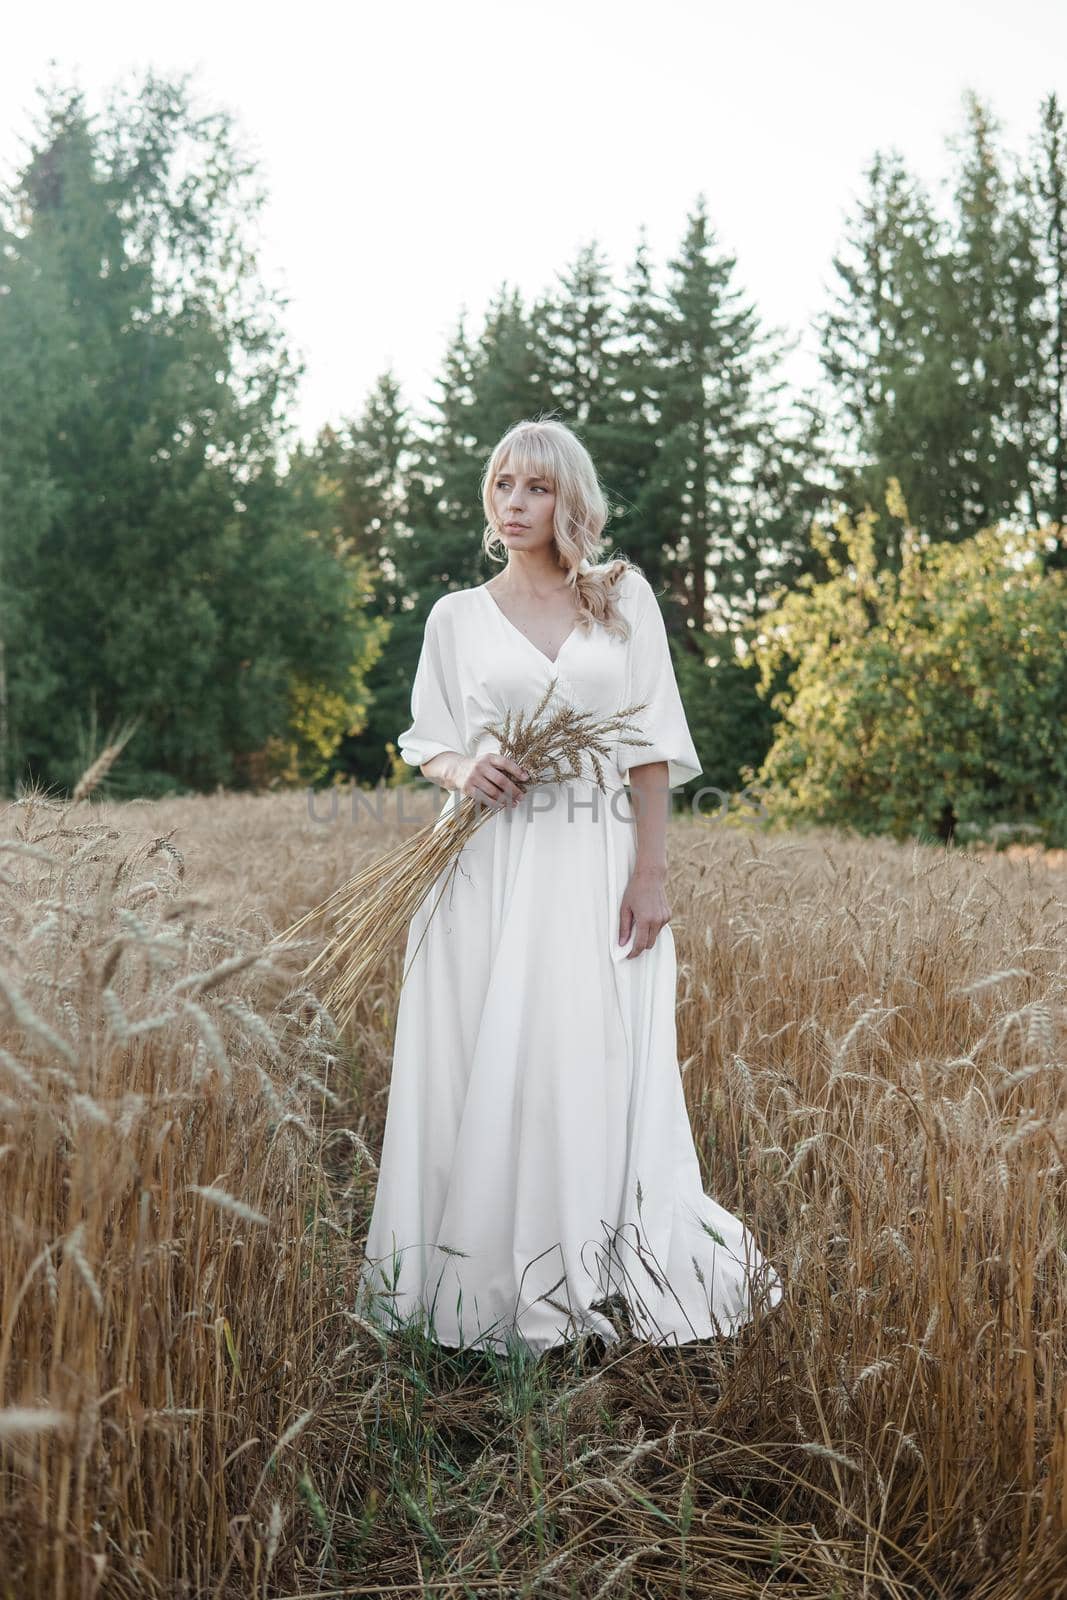 A blonde woman in a long white dress walks in a wheat field. The concept of a wedding and walking in nature. by Annu1tochka